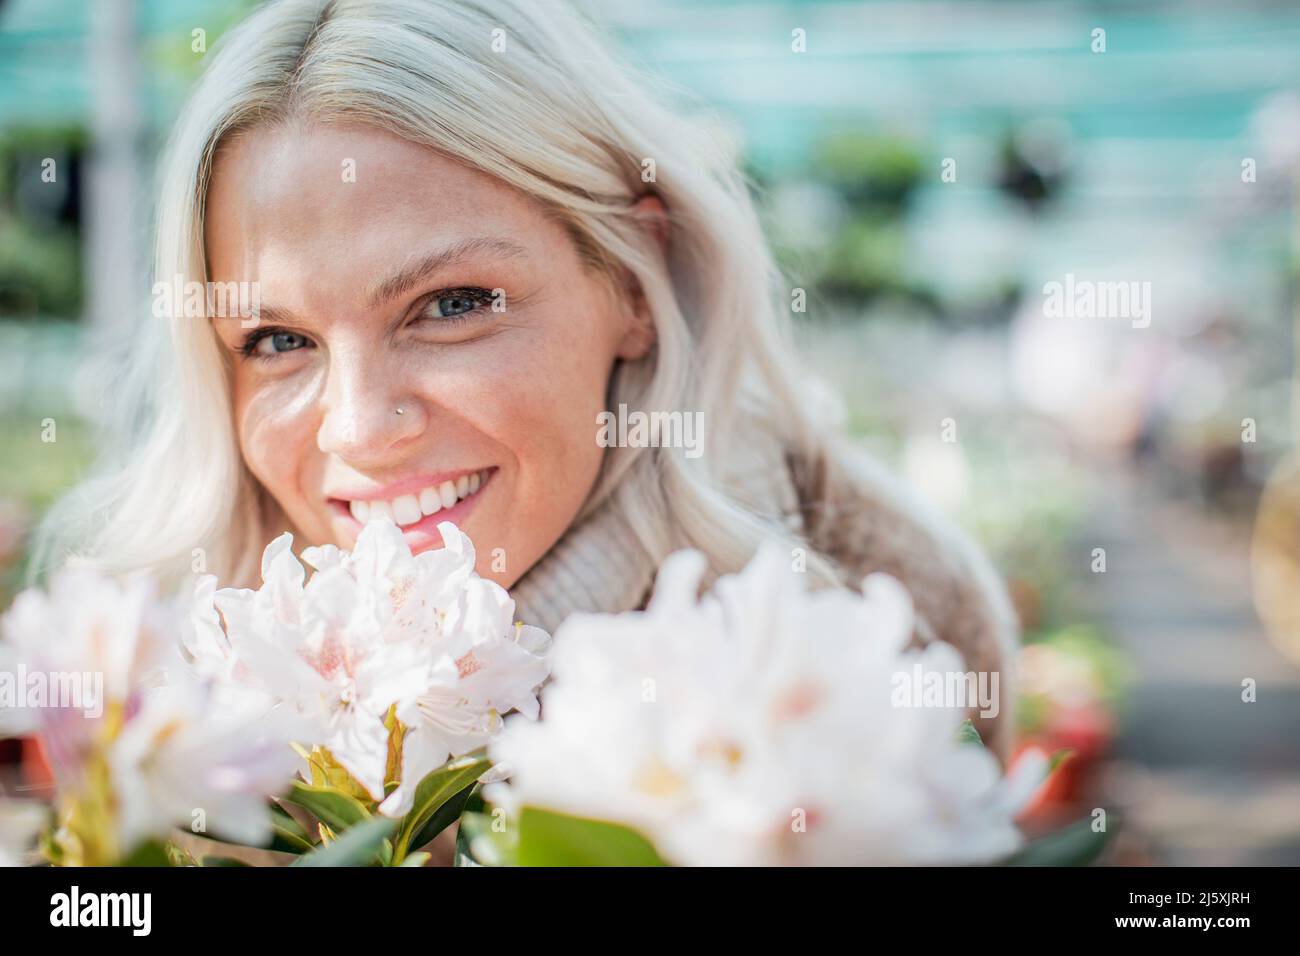 Close up portrait happy woman with flowers Stock Photo